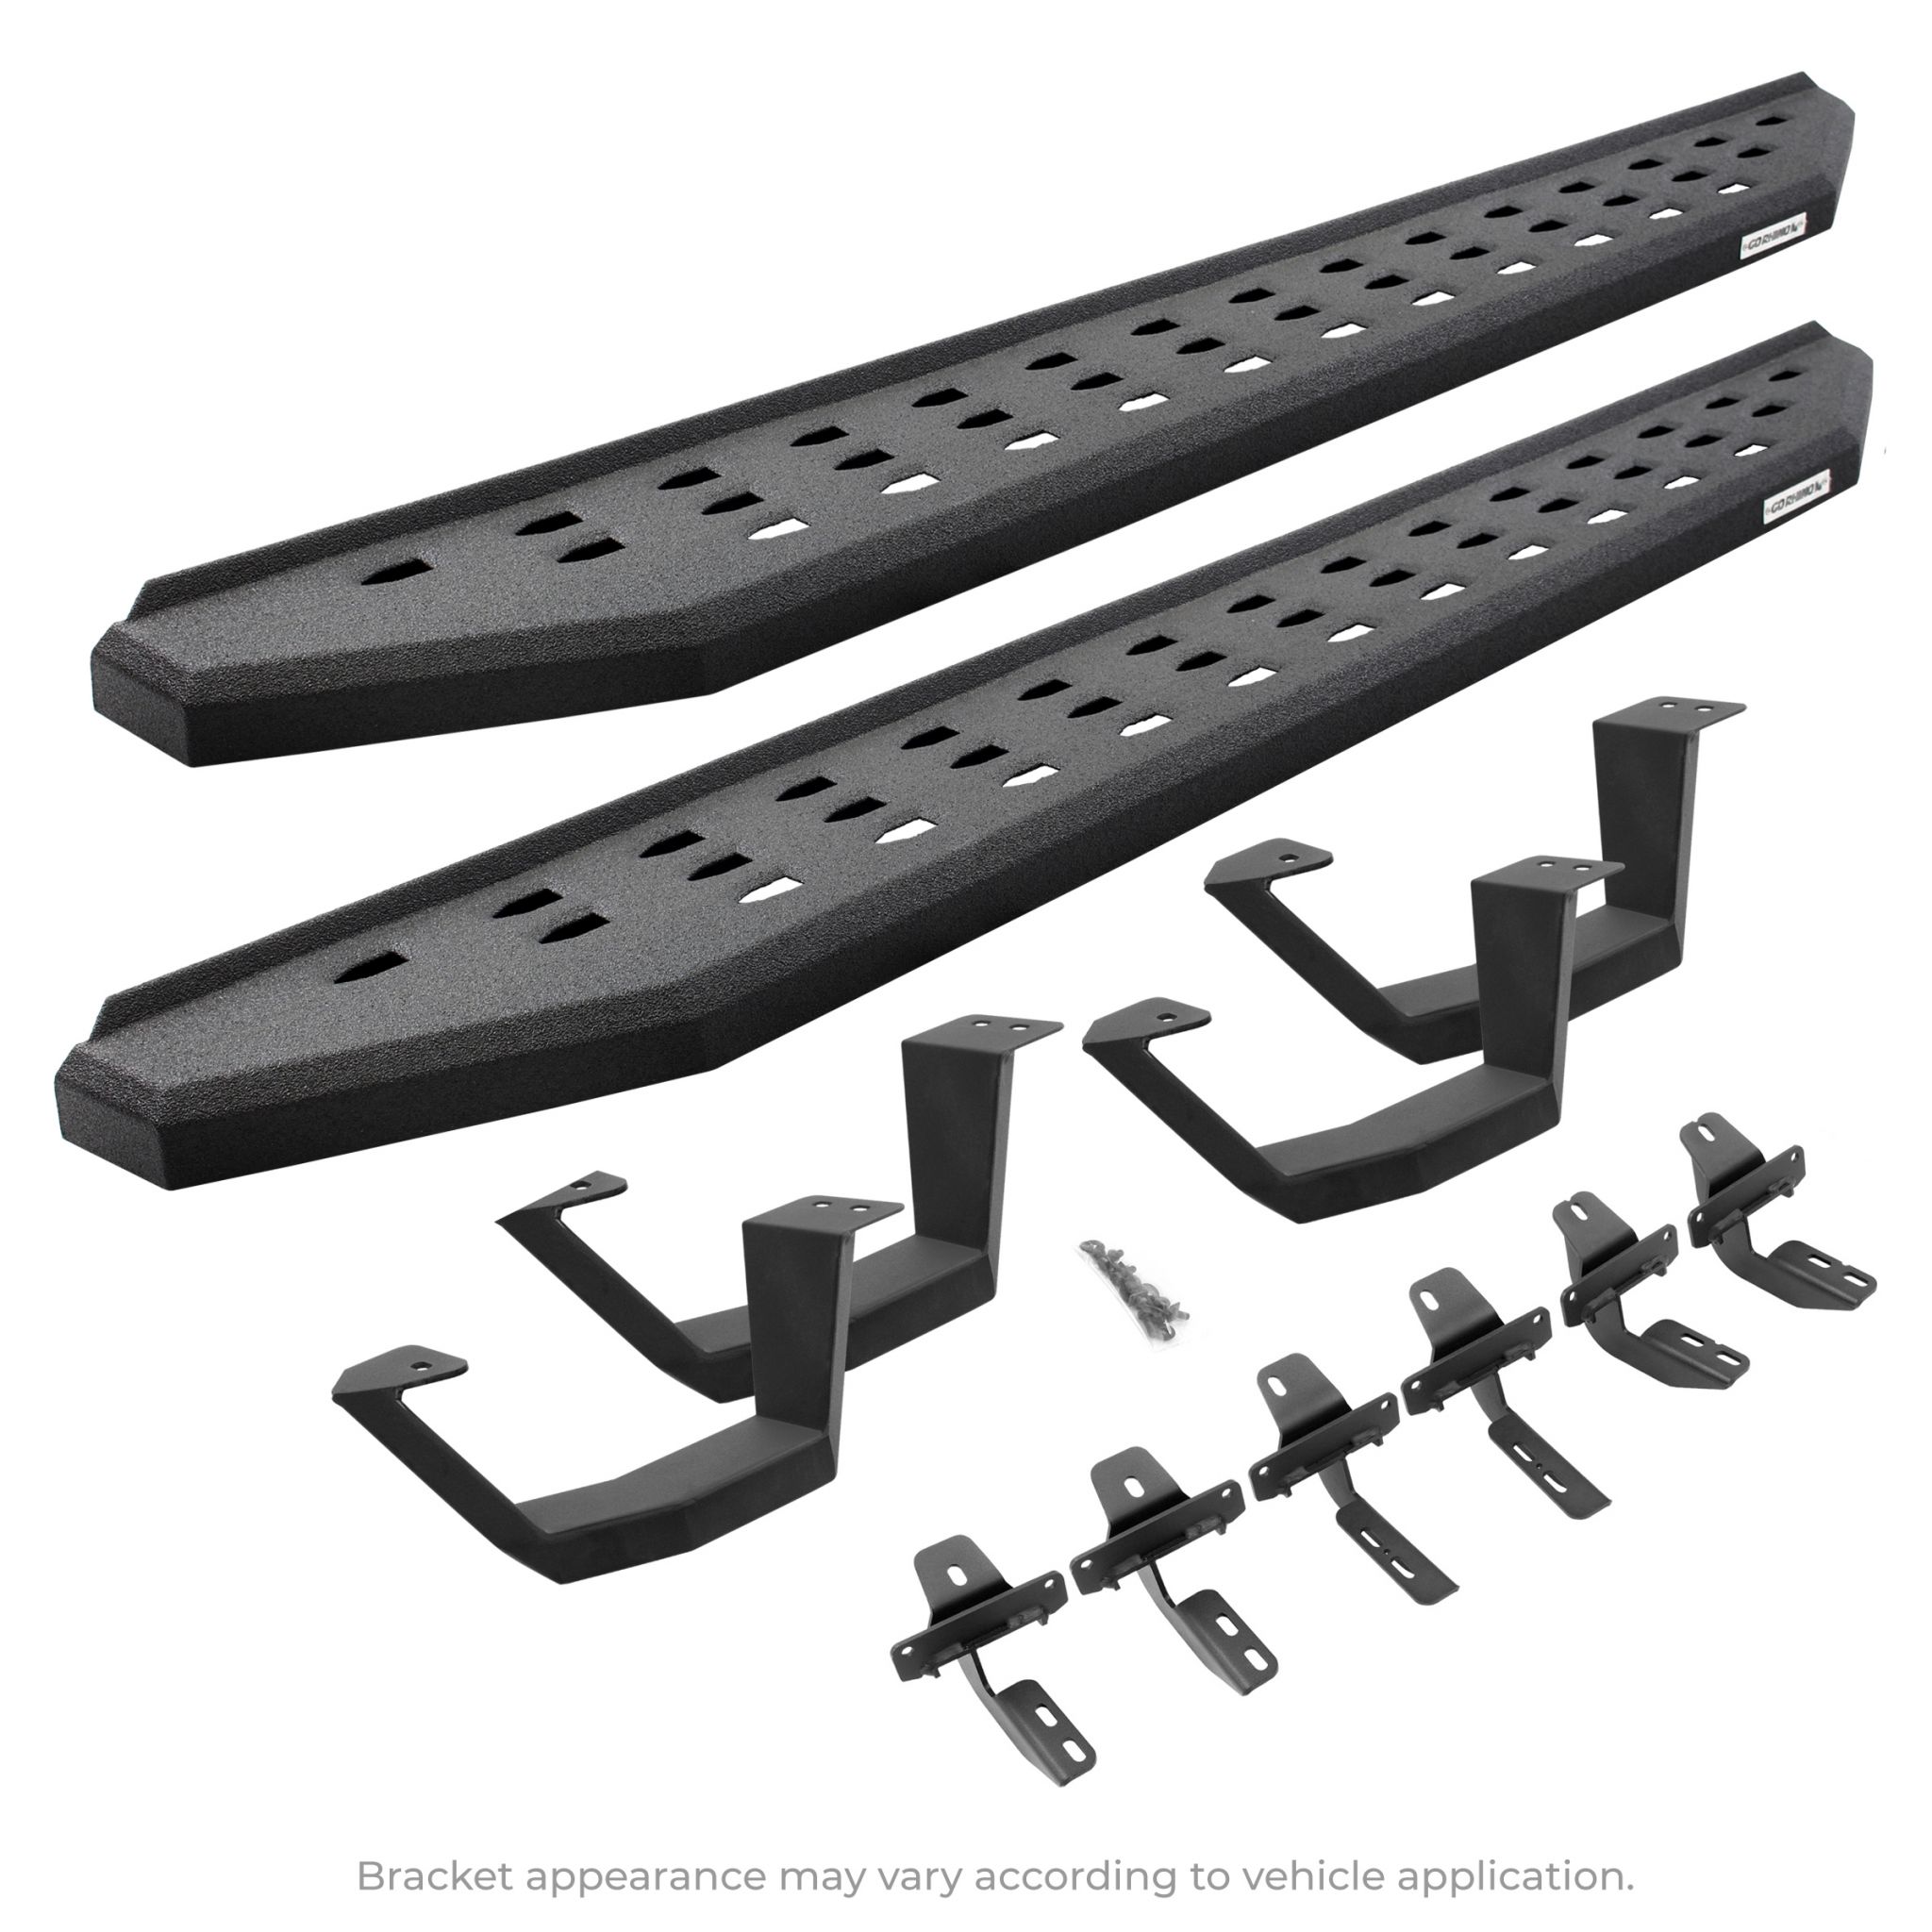 Go Rhino - 6941558720T - RB20 Running Boards With Mounting Brackets & 2 Pairs of Drop Steps Kit - Protective Bedliner Coating